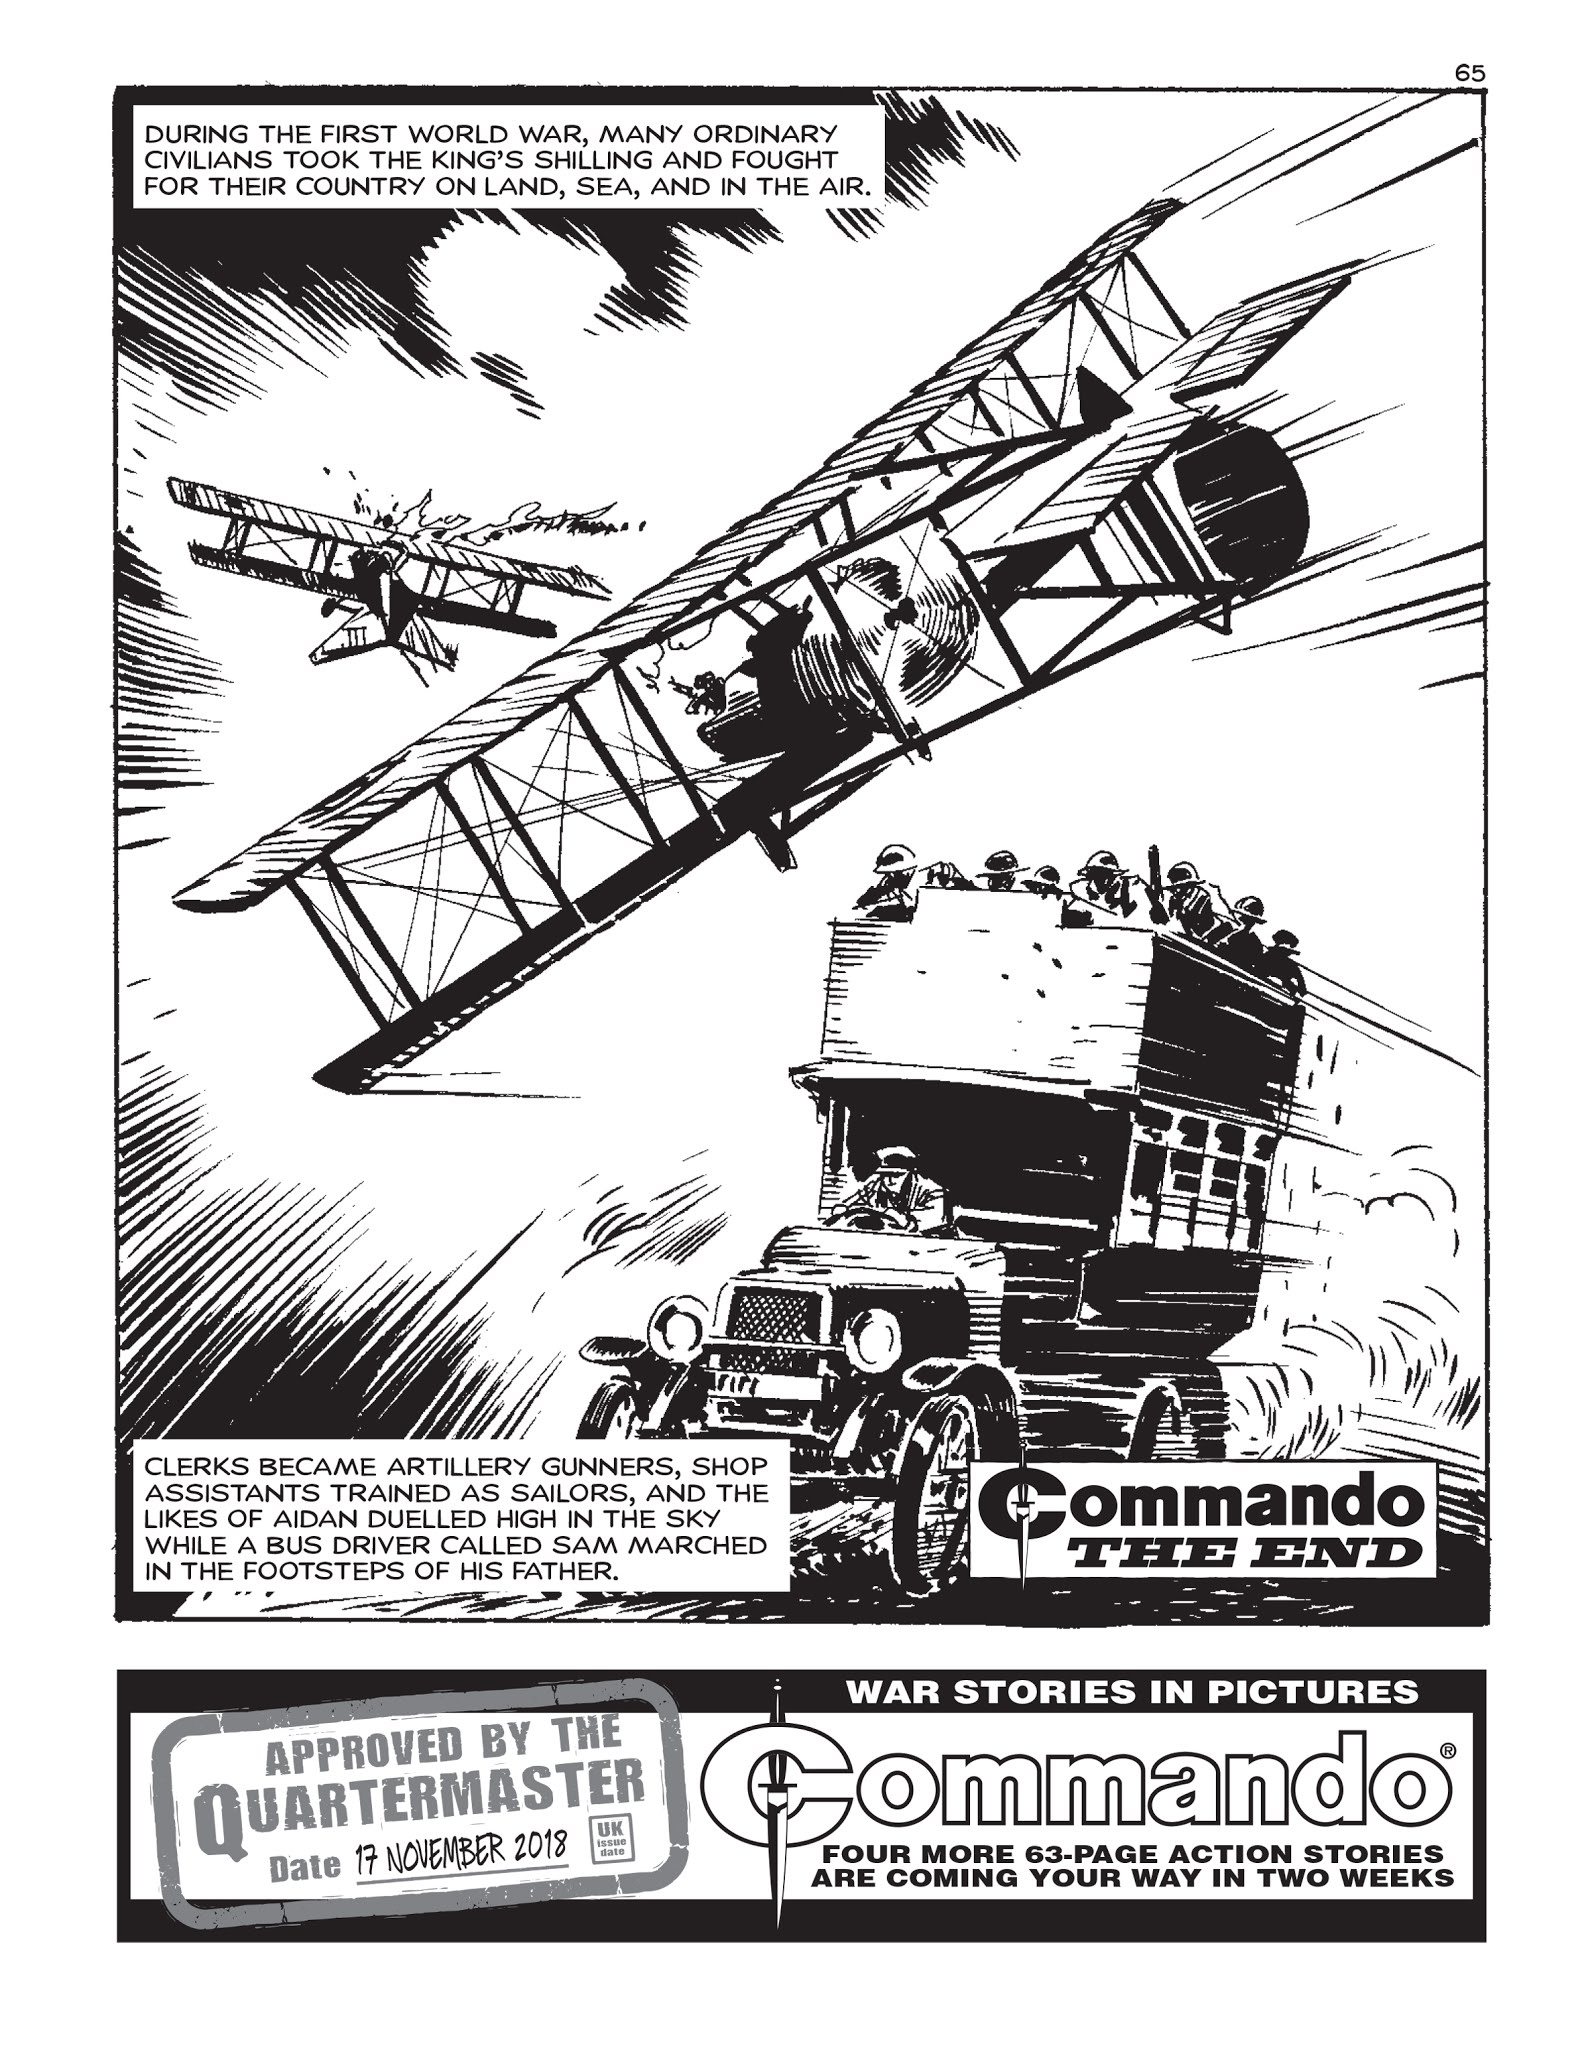 Read online Commando: For Action and Adventure comic -  Issue #5171 - 64